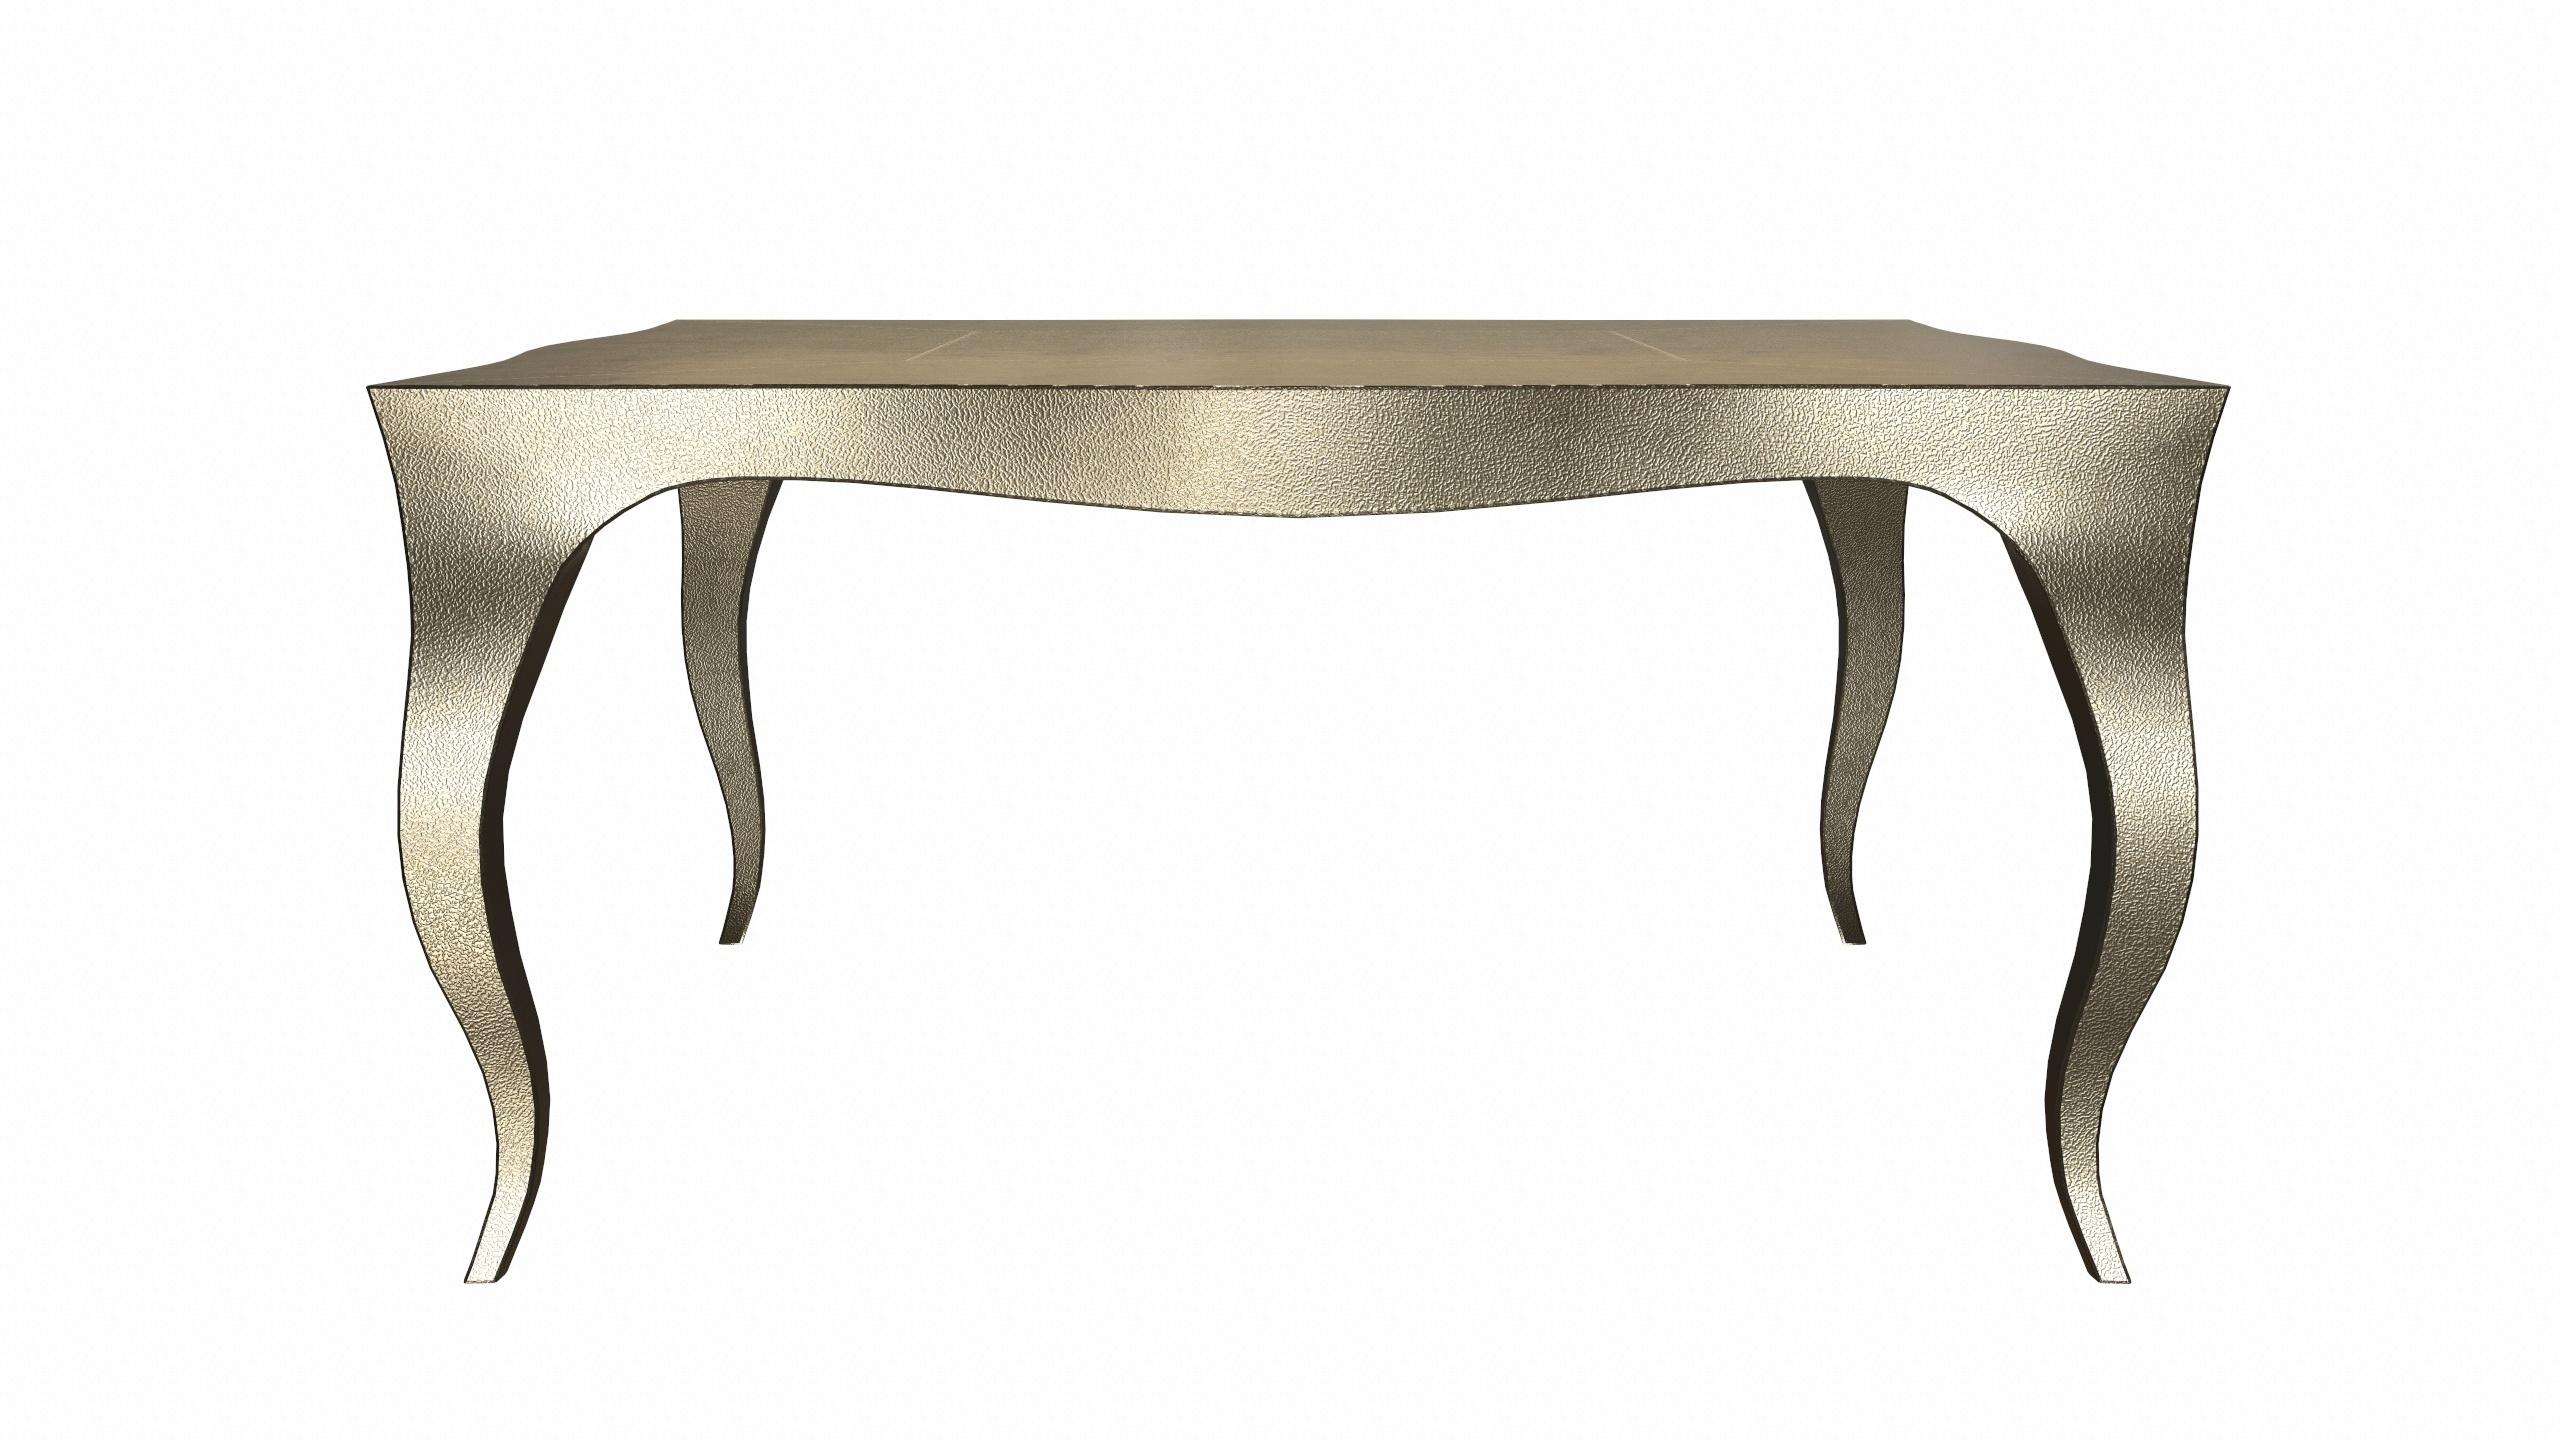 American Louise Art Deco Game Tables Fine Hammered Brass 18.5x18.5x10 inch by P. Mathieu For Sale